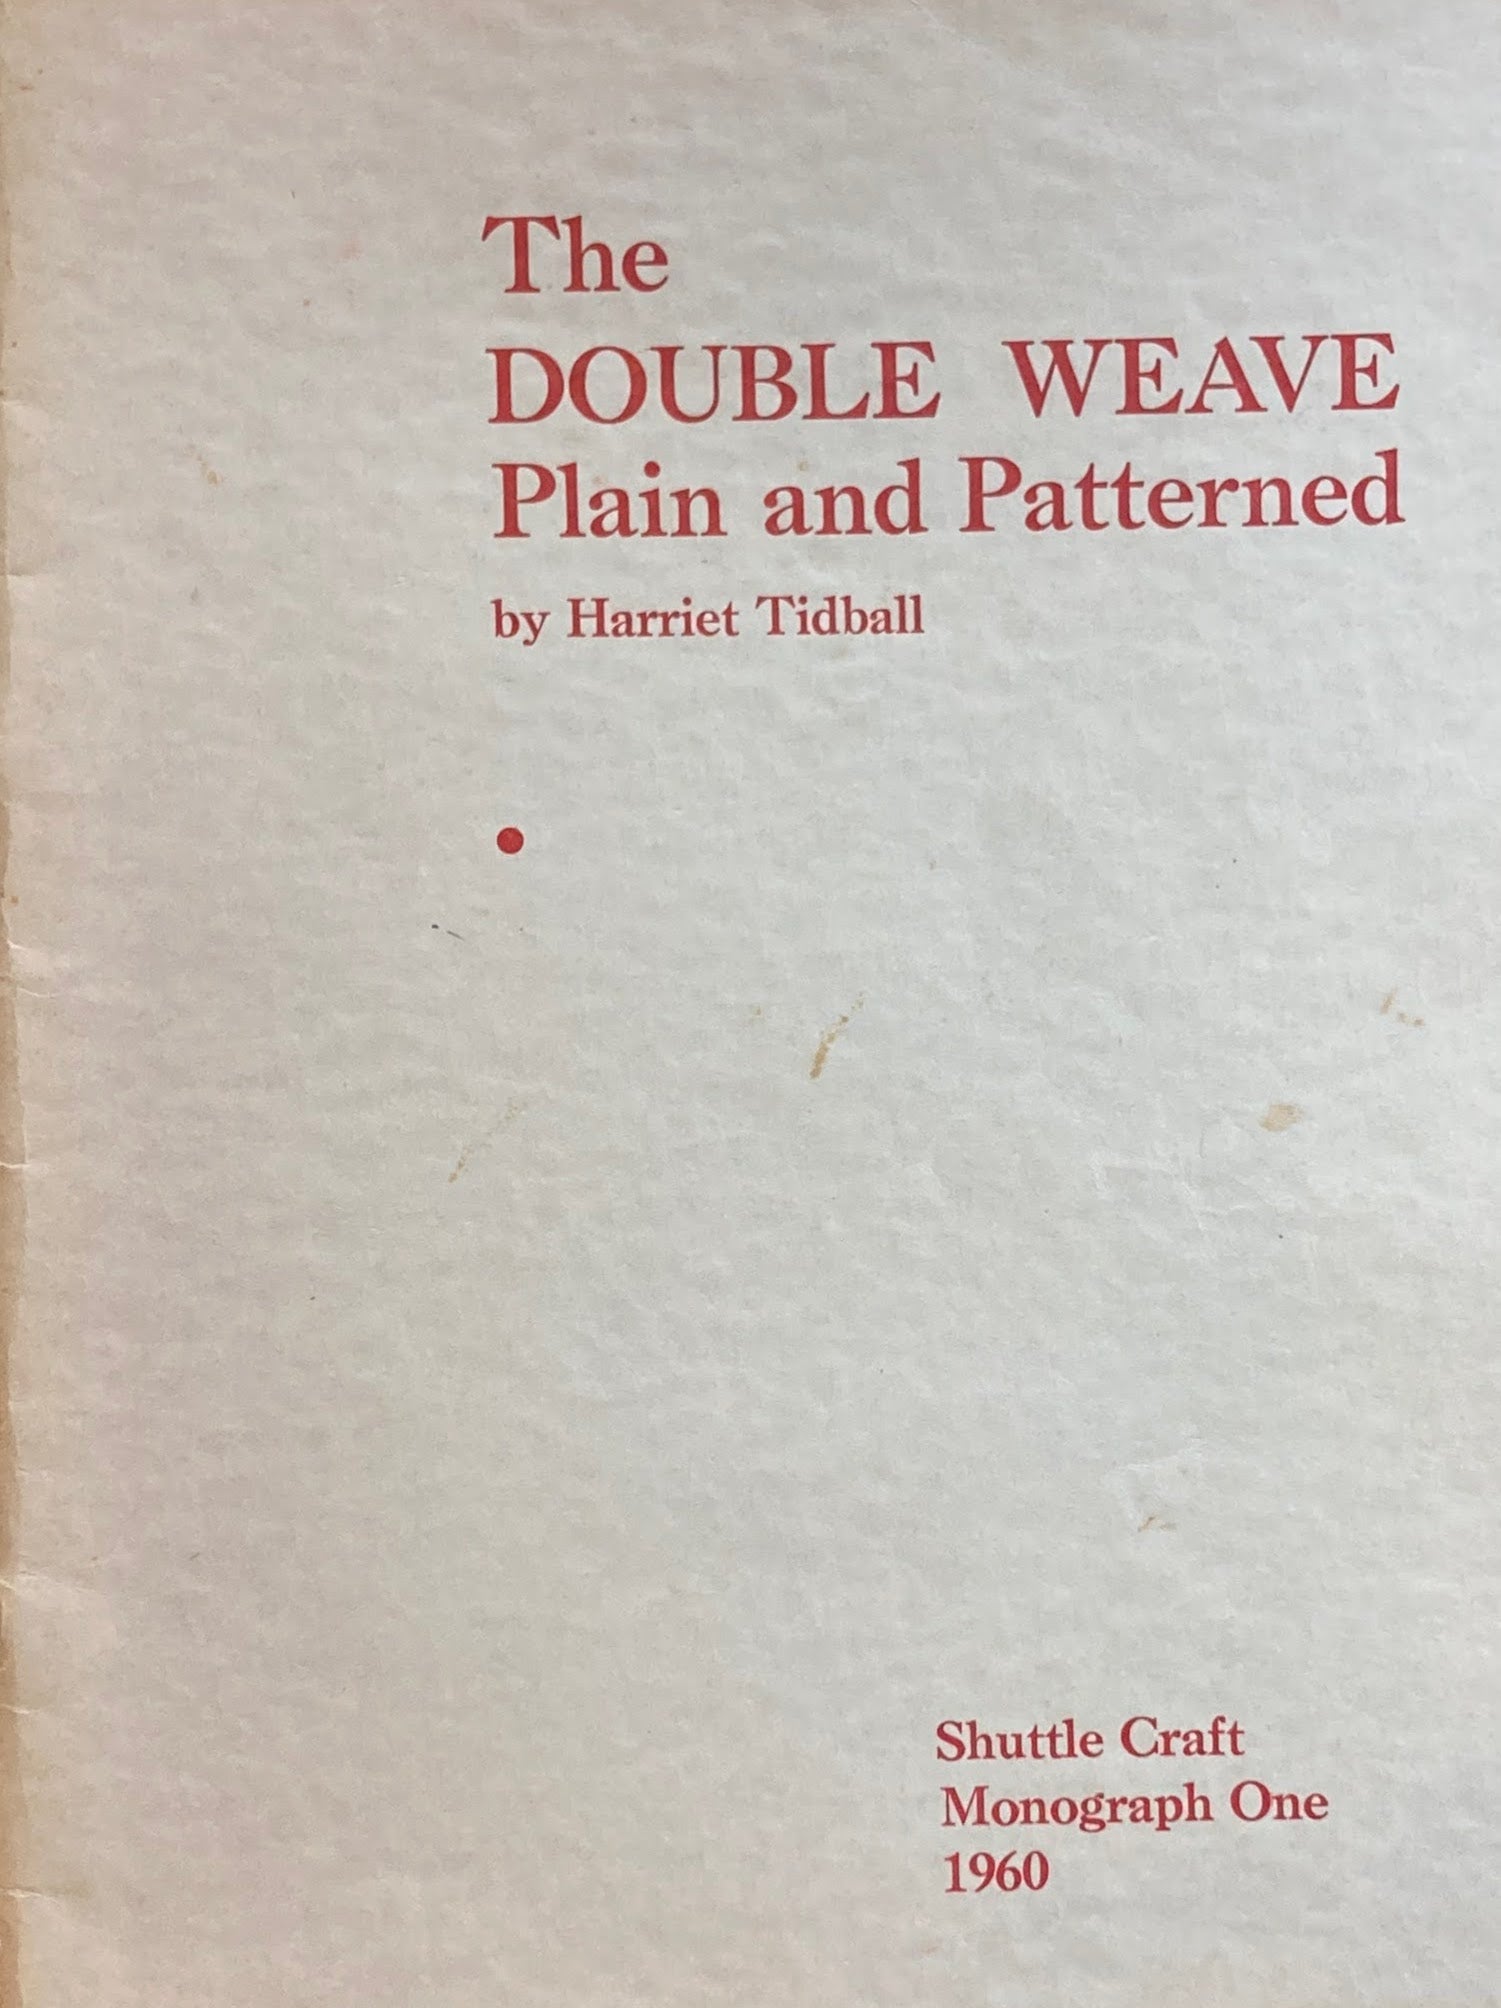 The Double Weave Plain and Patterned Harriet Tidball　Shuttle Craft Monograph One　1960　Portfolio edition付き　2冊